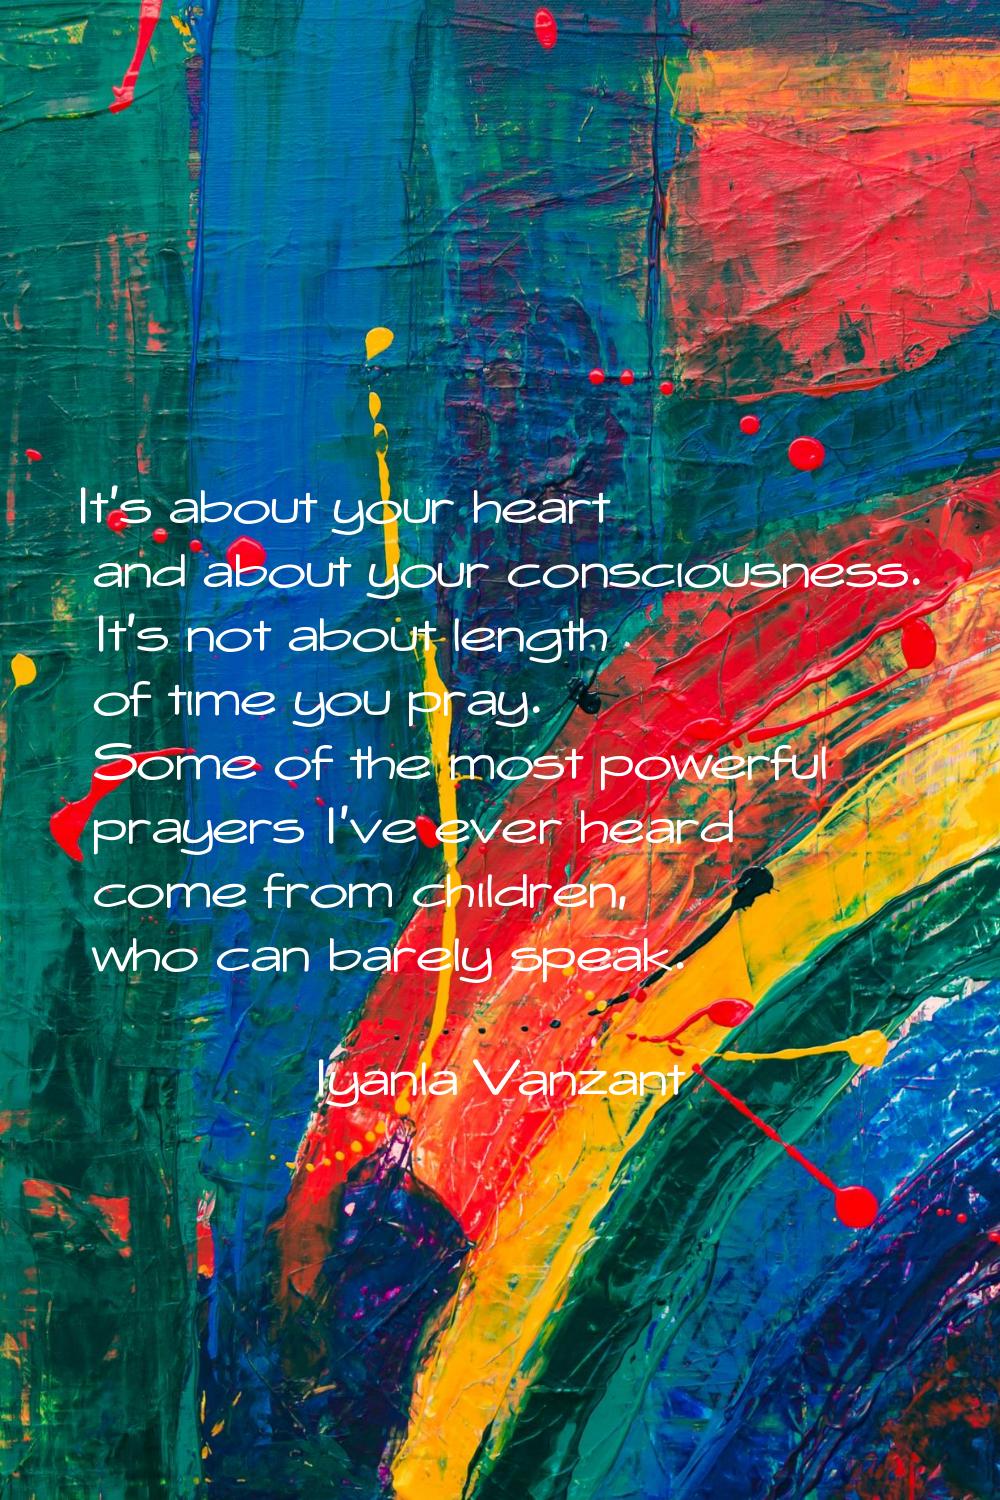 It's about your heart and about your consciousness. It's not about length of time you pray. Some of